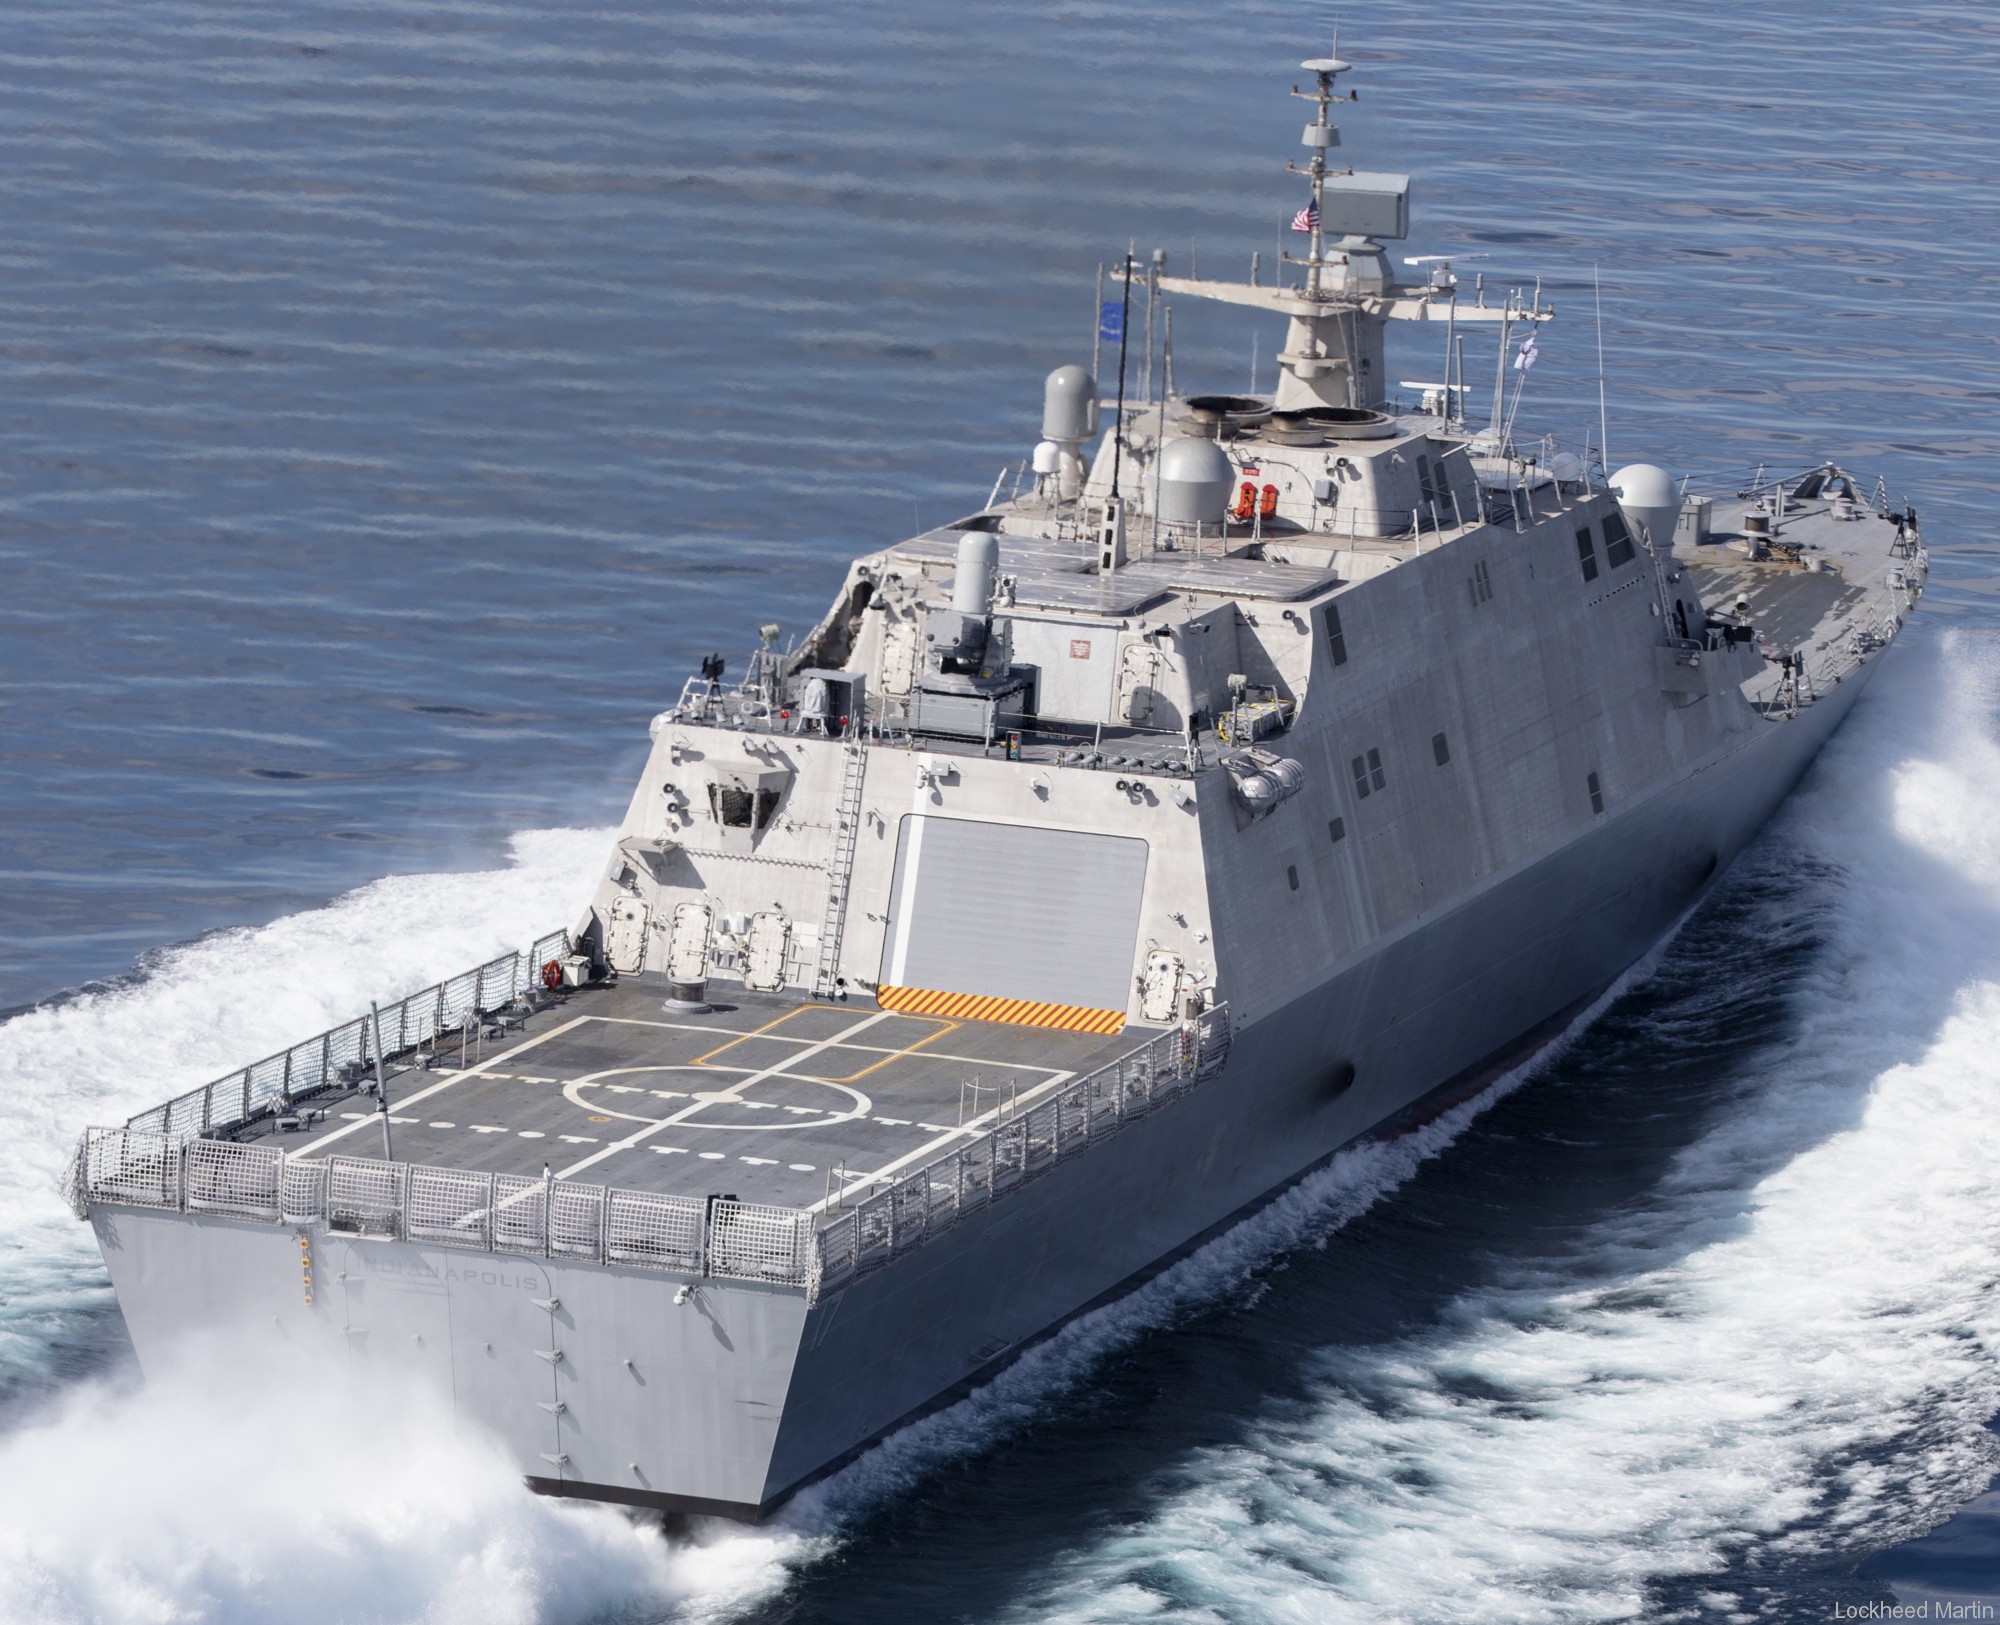 lcs-17 uss indianapolis freedom class littoral combat ship us navy 22